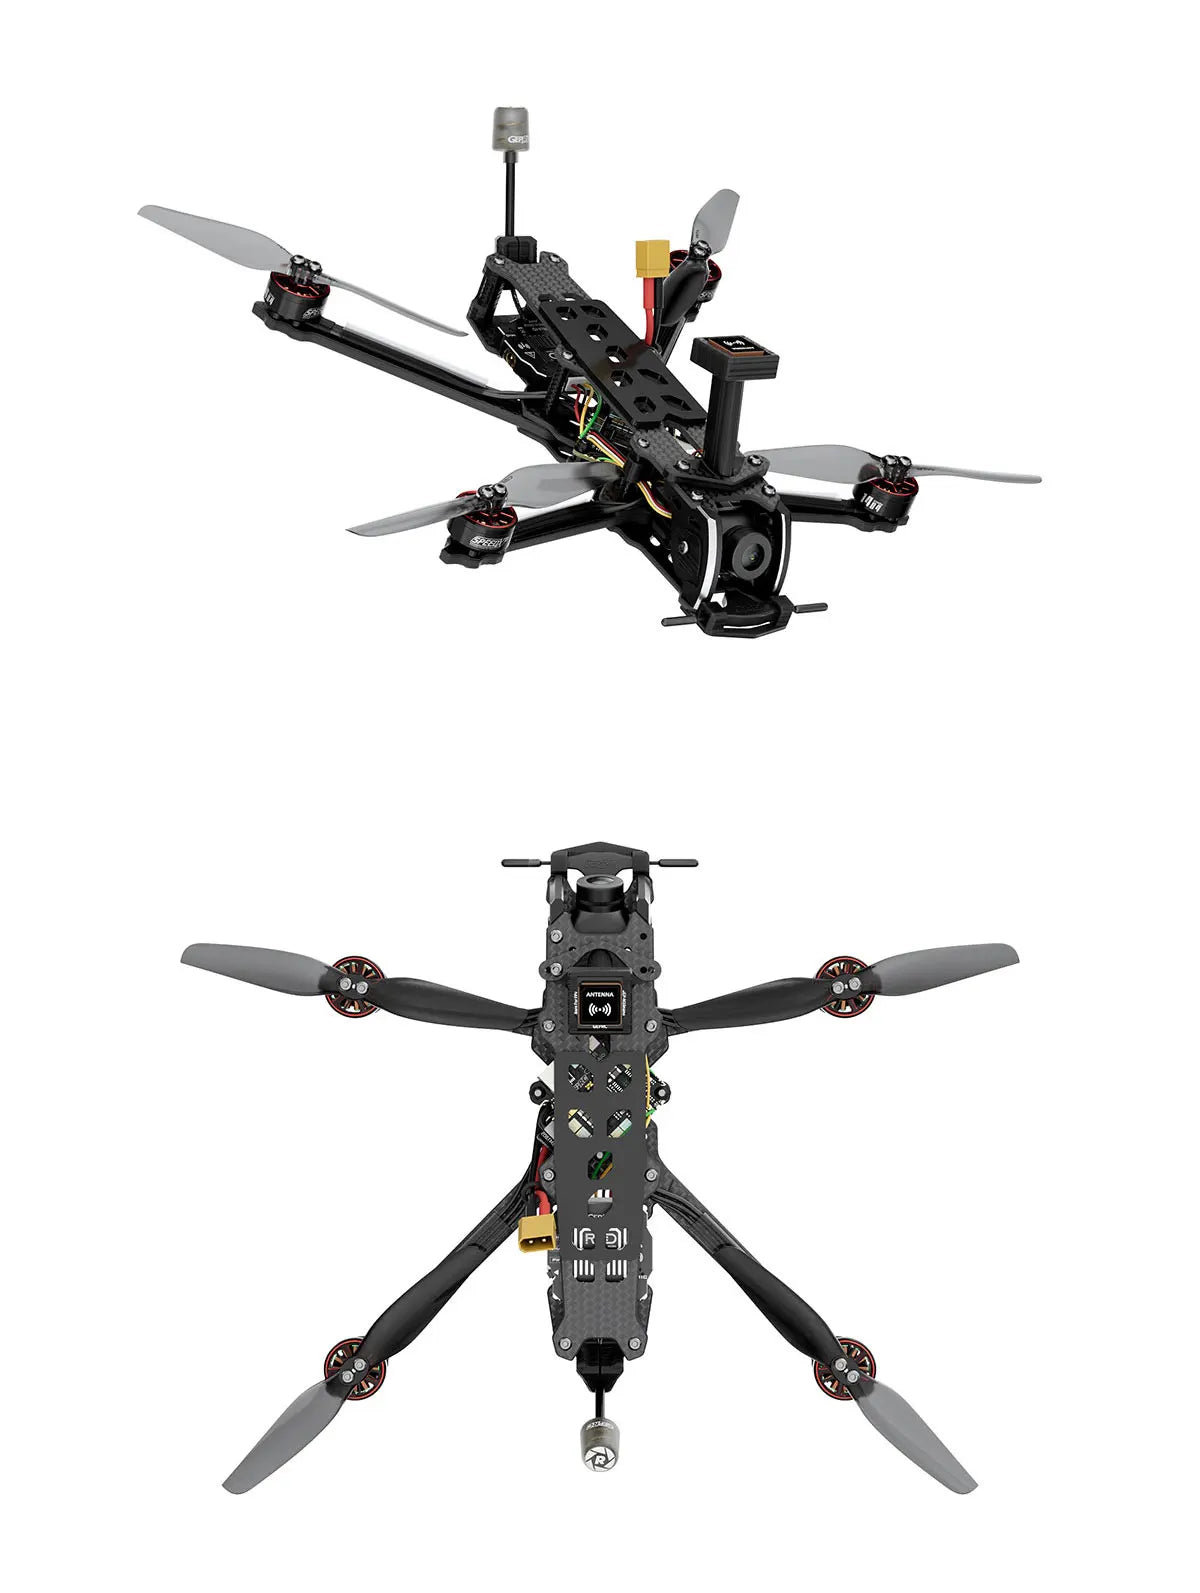 GEPRC Tern-LR40 HD O3 Long Range FPV, damage caused by unauthorized modification of circuits . Error weld mismatch